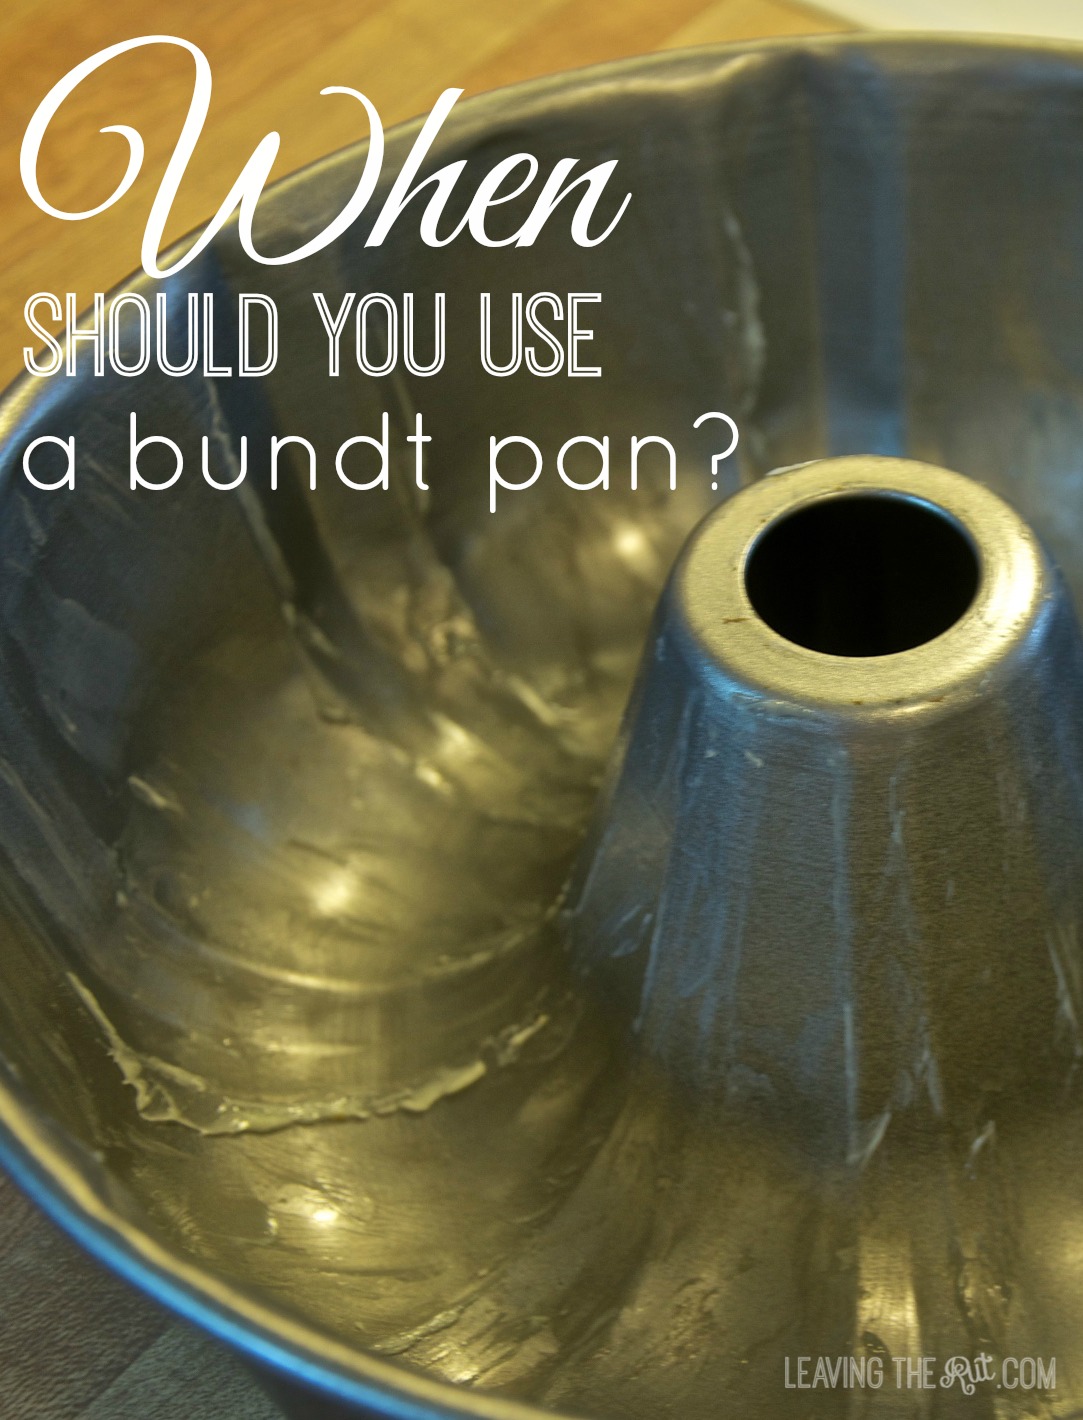 Fluted Tube Pan 101: Things you should know when using a Fluted Tube P